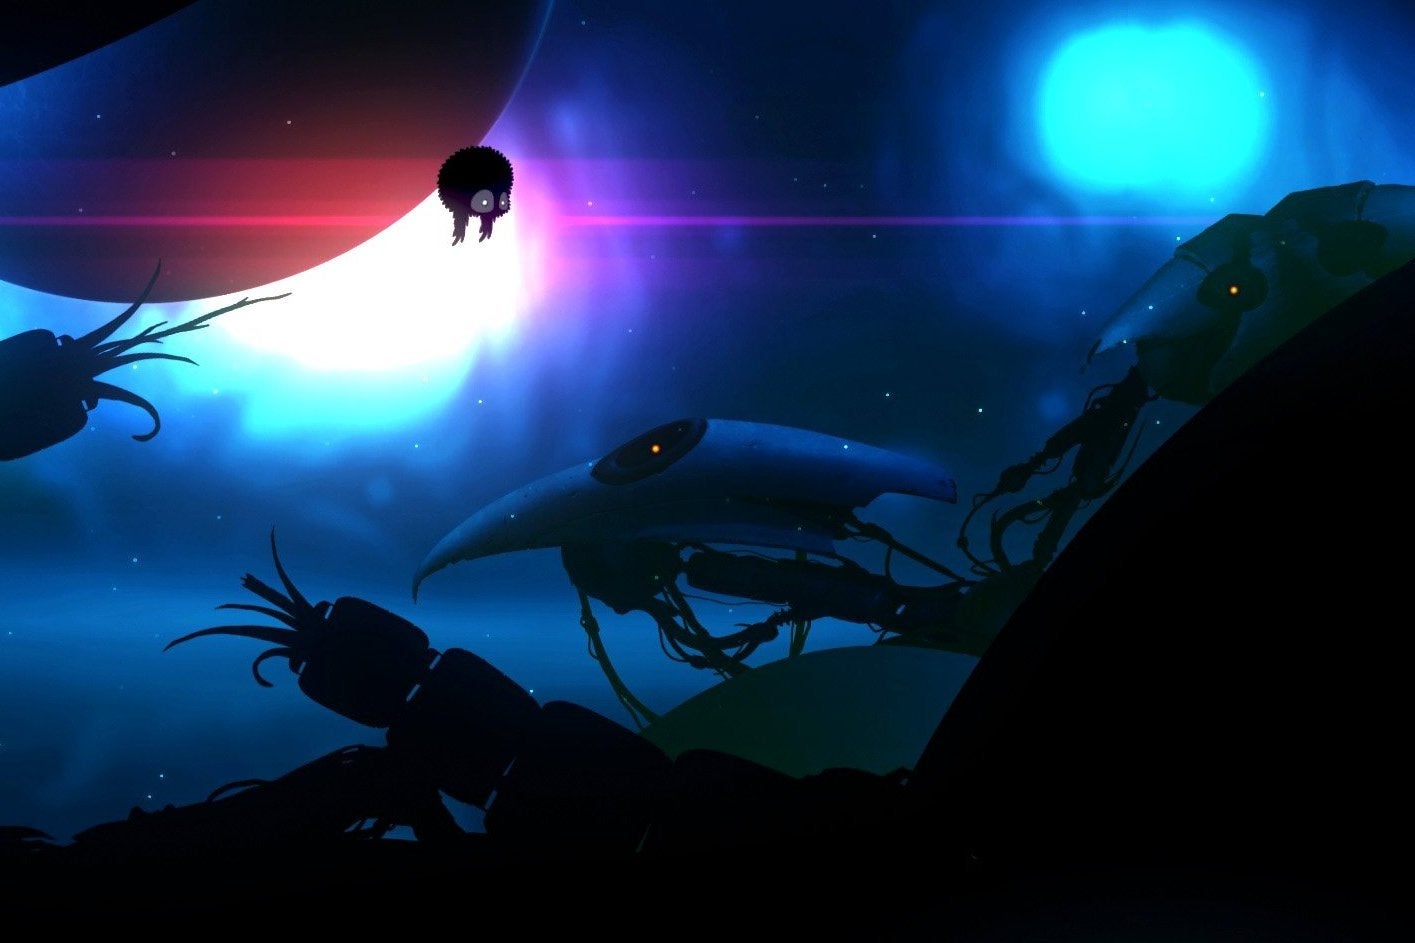 Image for Badland is getting remastered for consoles and PC